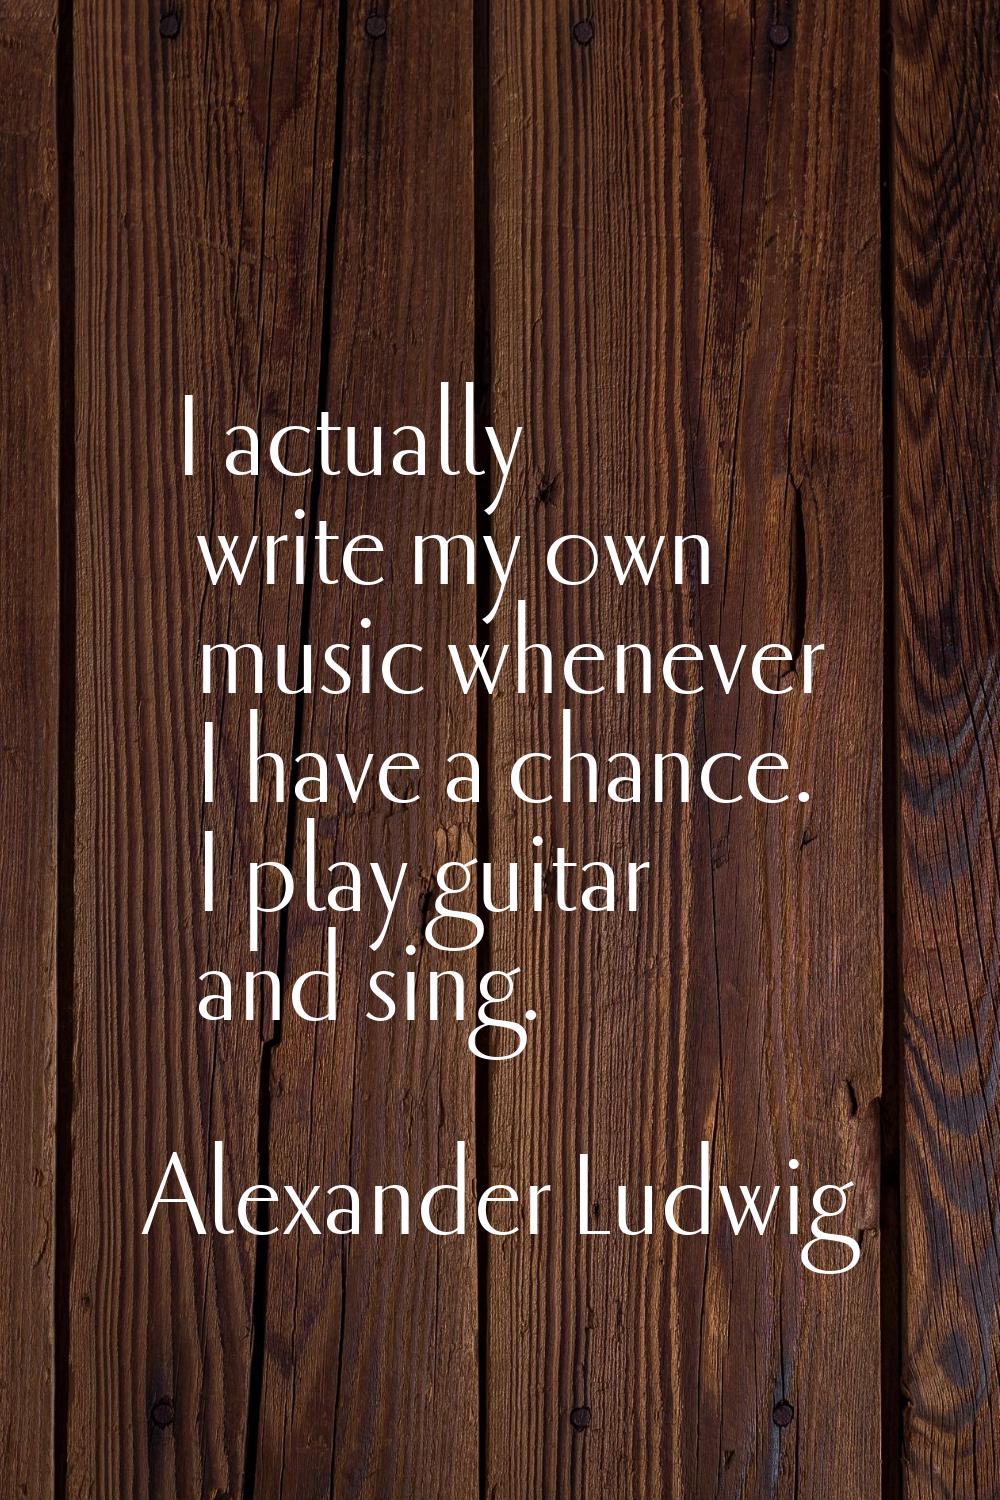 I actually write my own music whenever I have a chance. I play guitar and sing.